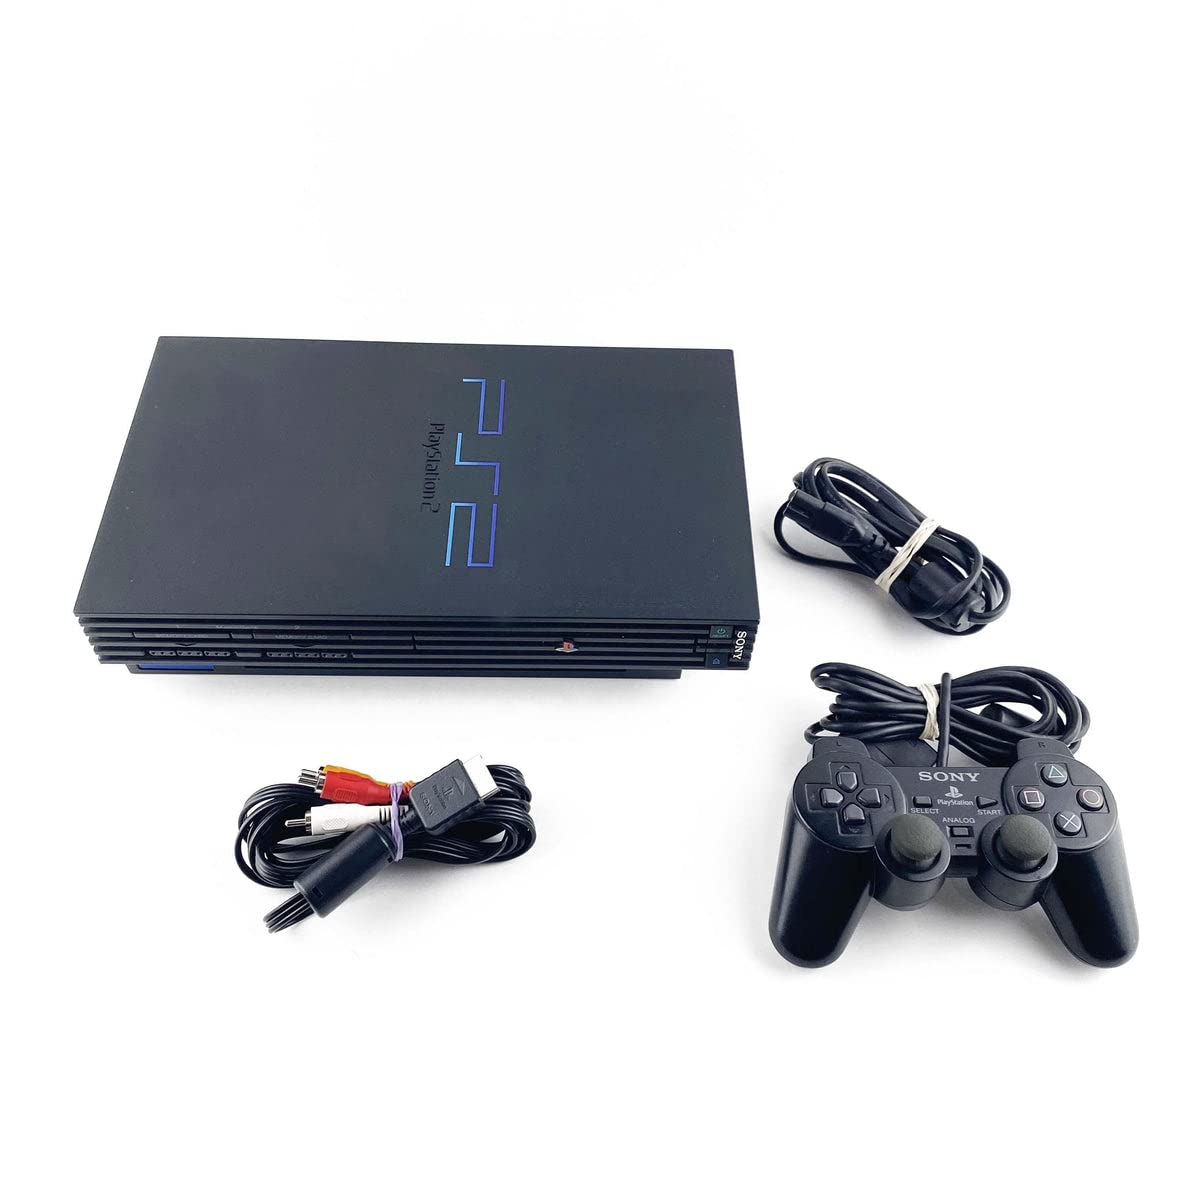 Sony PlayStation 2 Console - Black - image 2 of 2